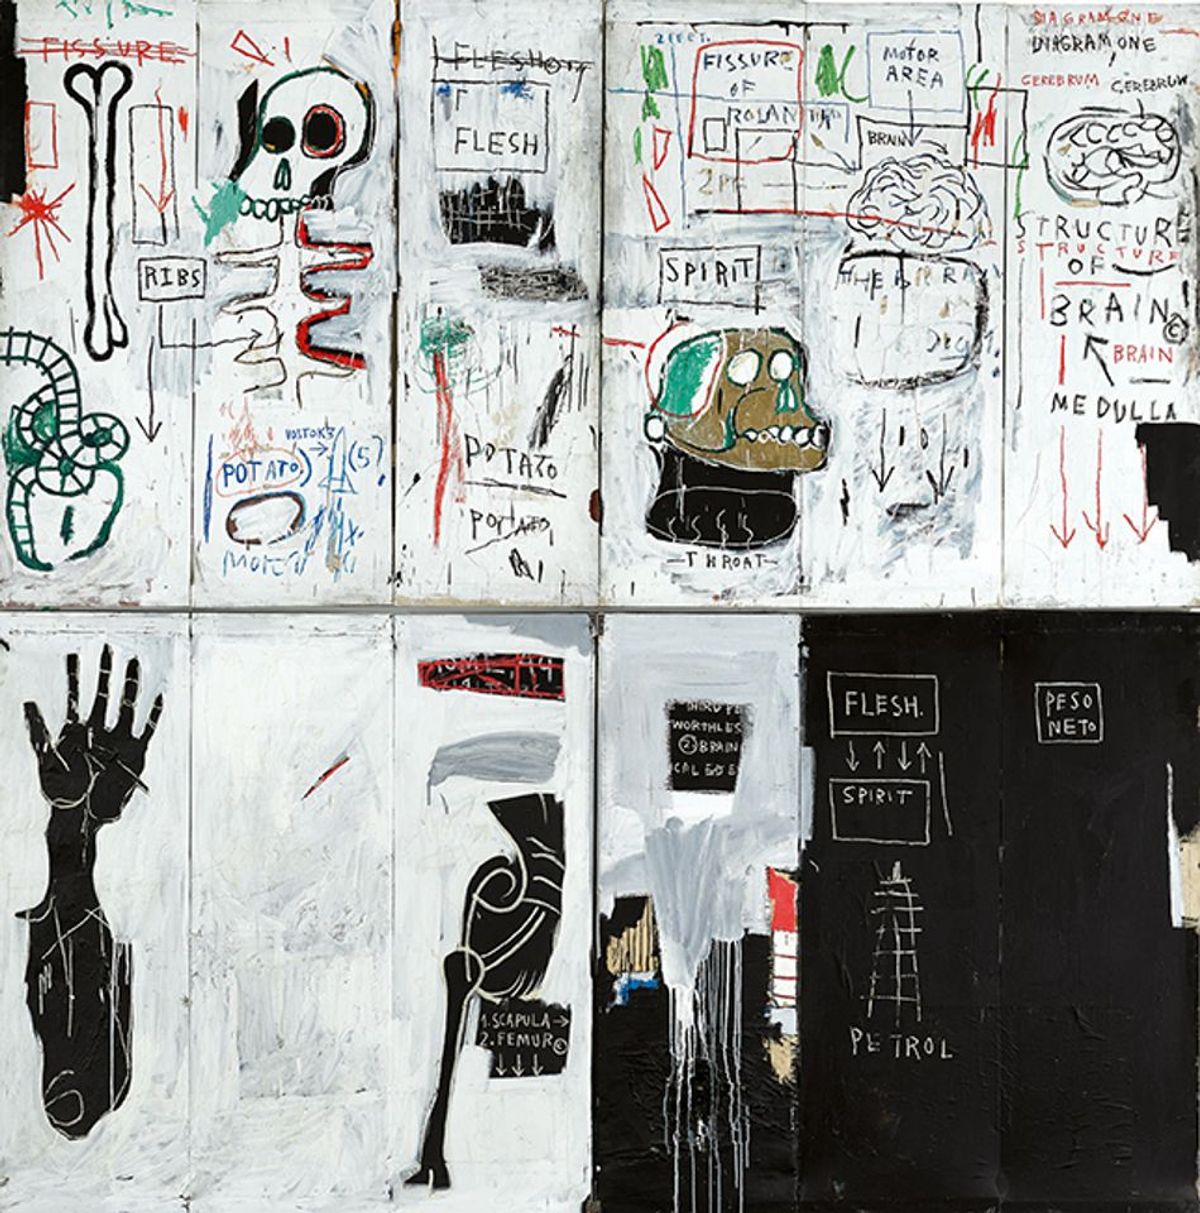 Jean-Michel Basquiat's Flesh and Spirit (1982-83) was offered at Sotheby's New York on 16 May with an estimate in the region of $30m 2018 Estate of Jean-Michel Basquiat / Artists Rights Society (ARS), New York, NY. Courtesy of Sotheby's